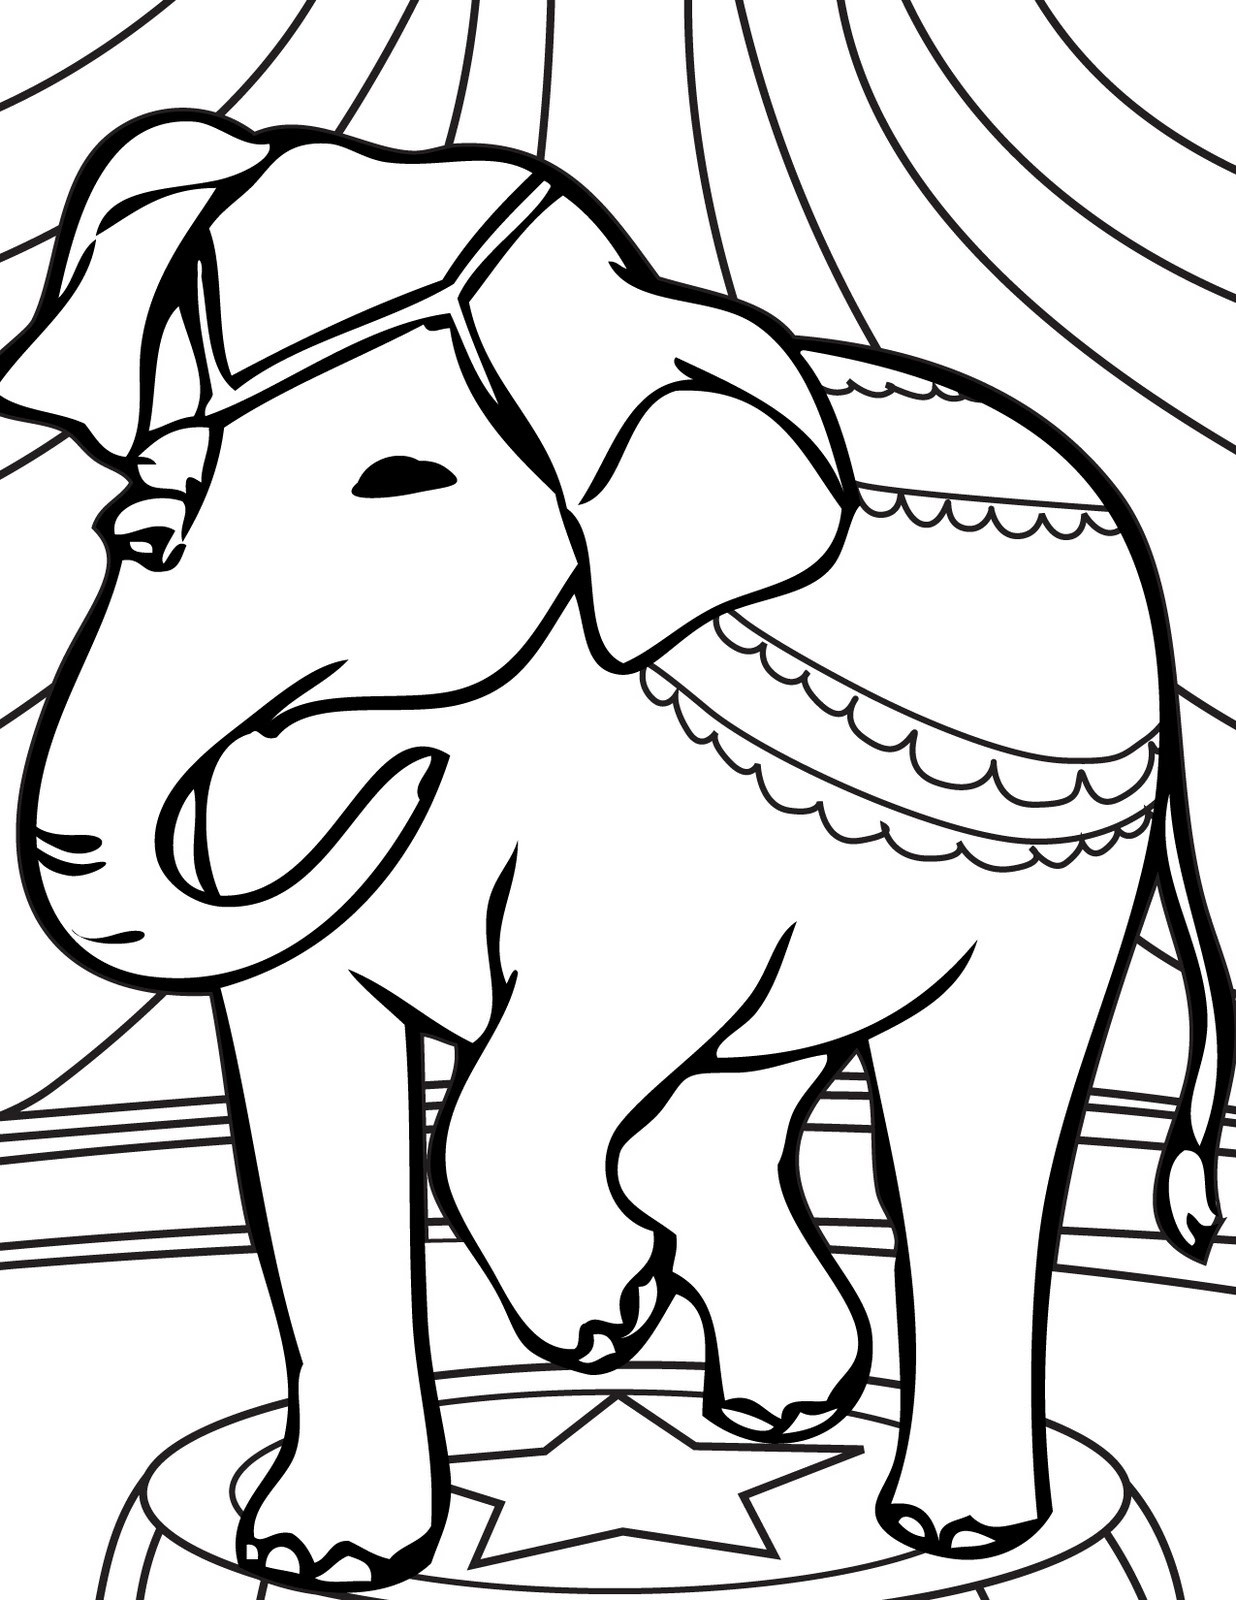 Kids Coloring Sheet
 transmissionpress Circus Elephant Coloring Pages